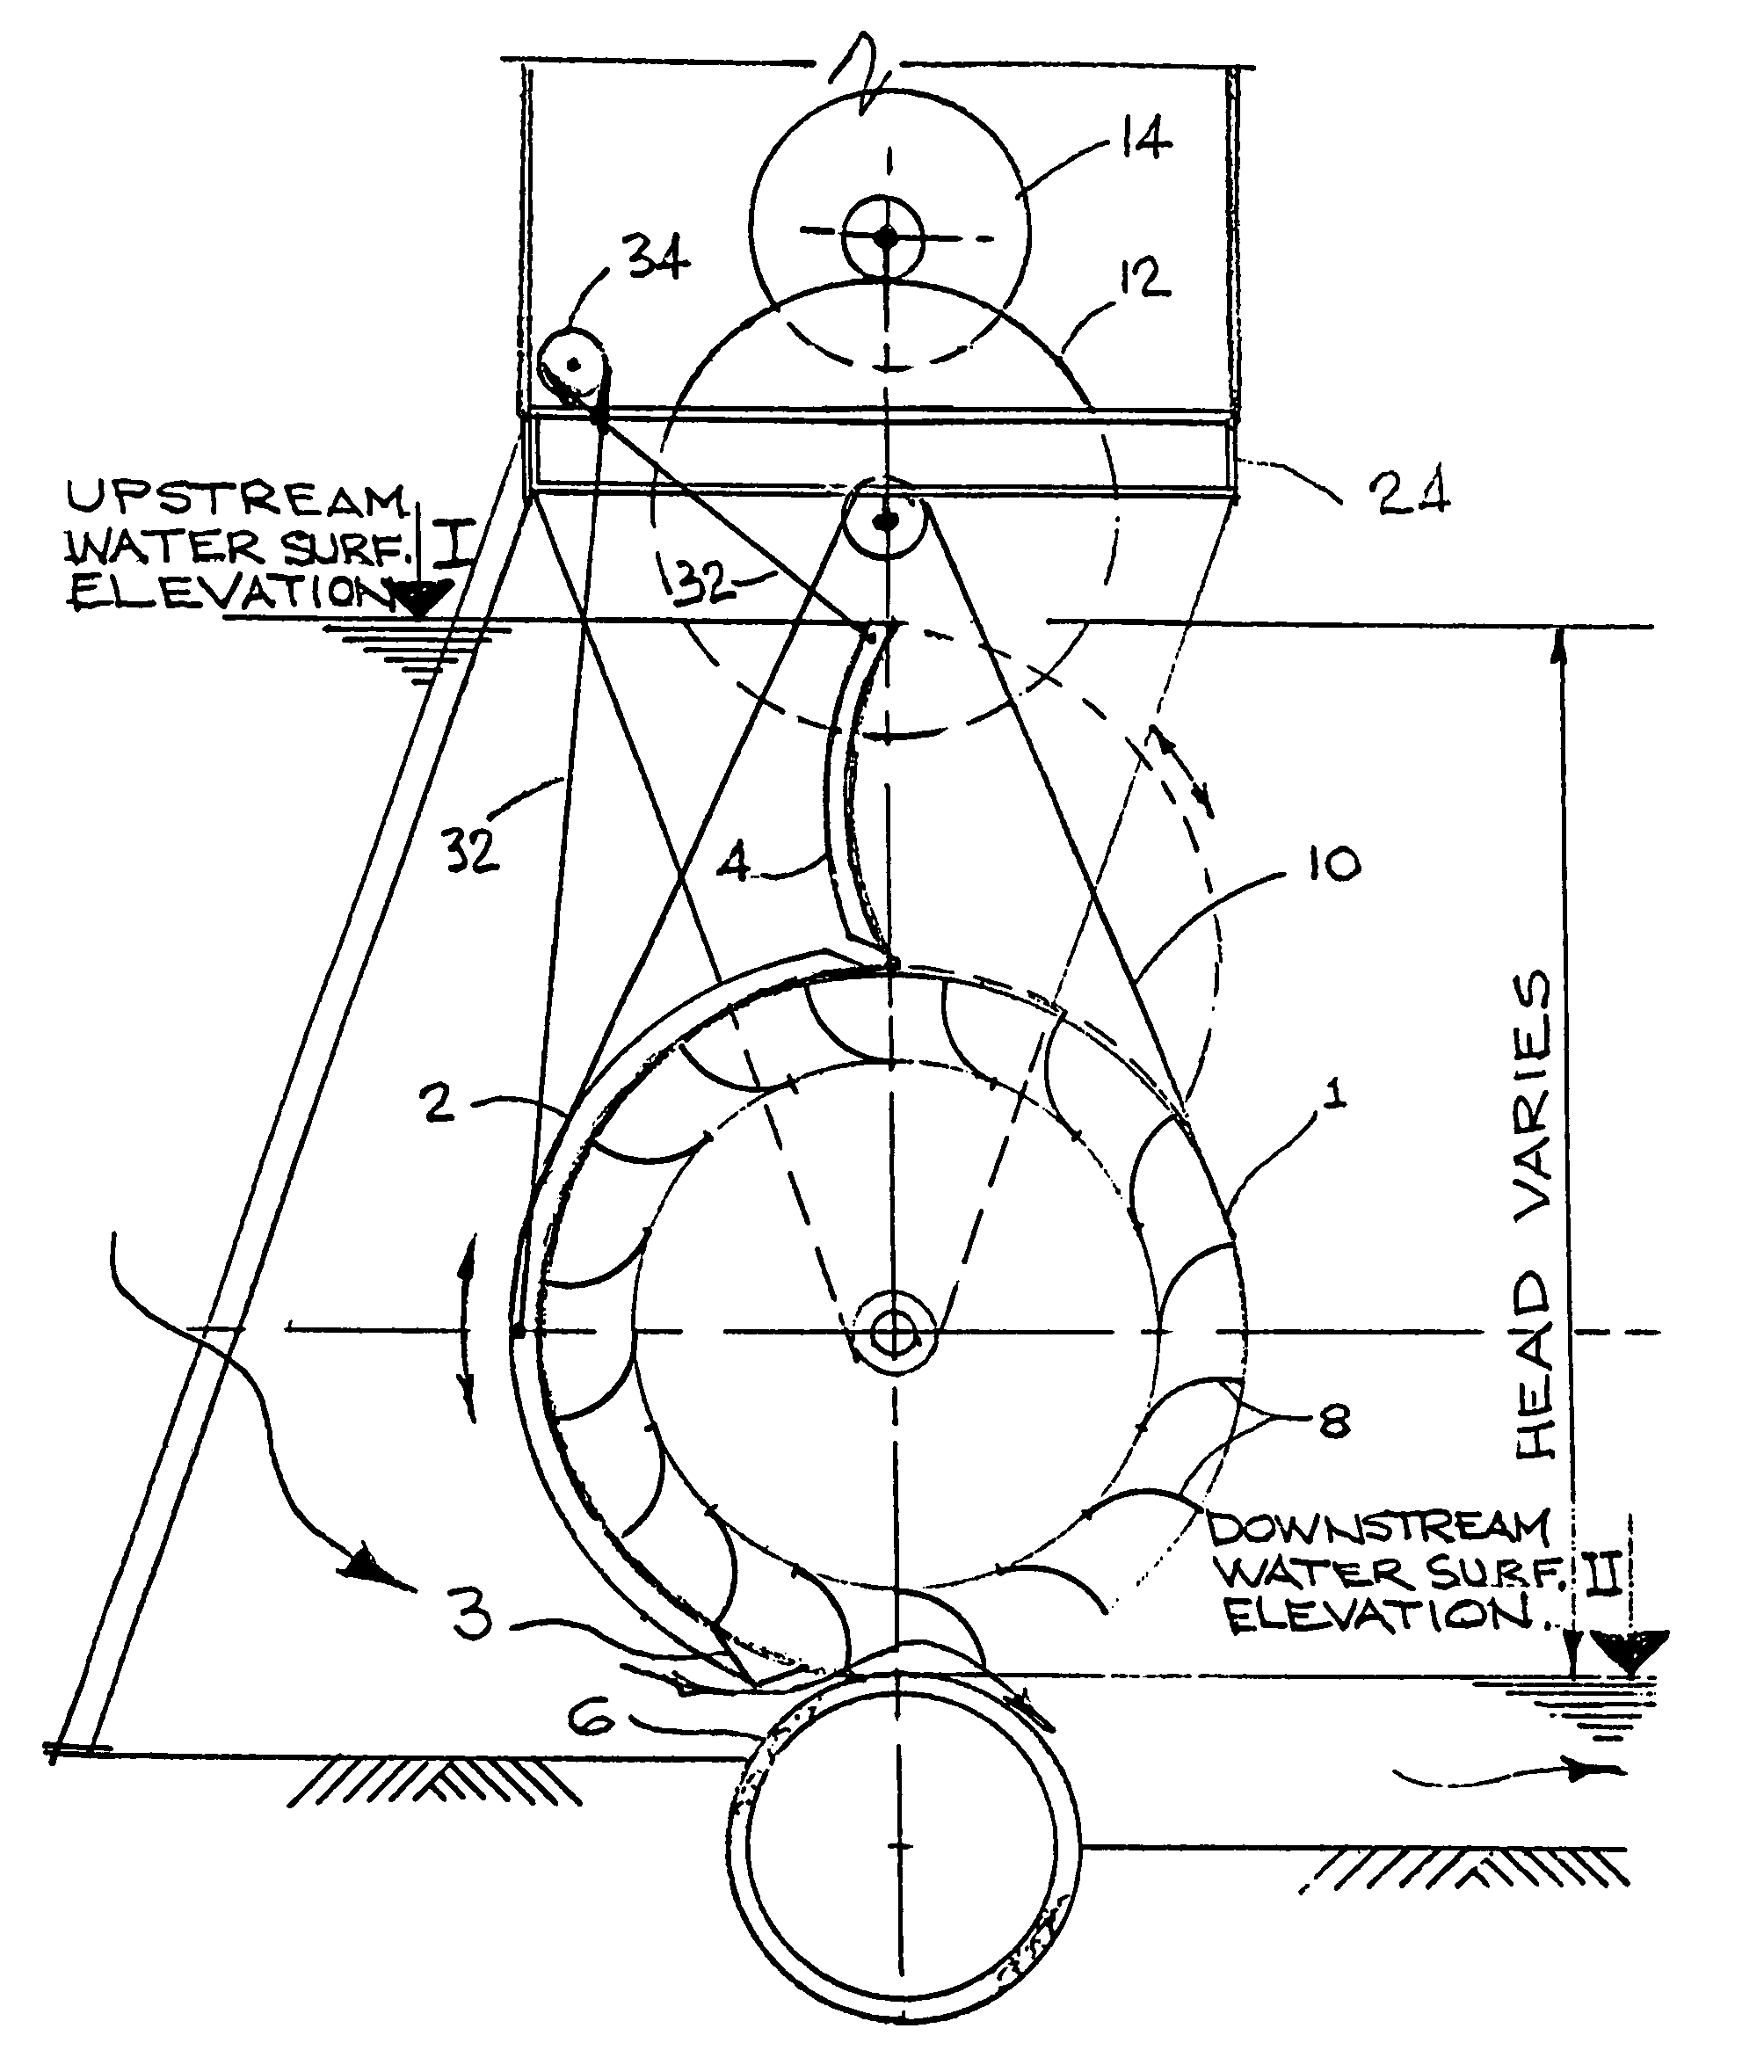 Undershot impulse jet driven waterwheel having an automatically adjustable radial gate for optimal hydroelectric power generation and water level control